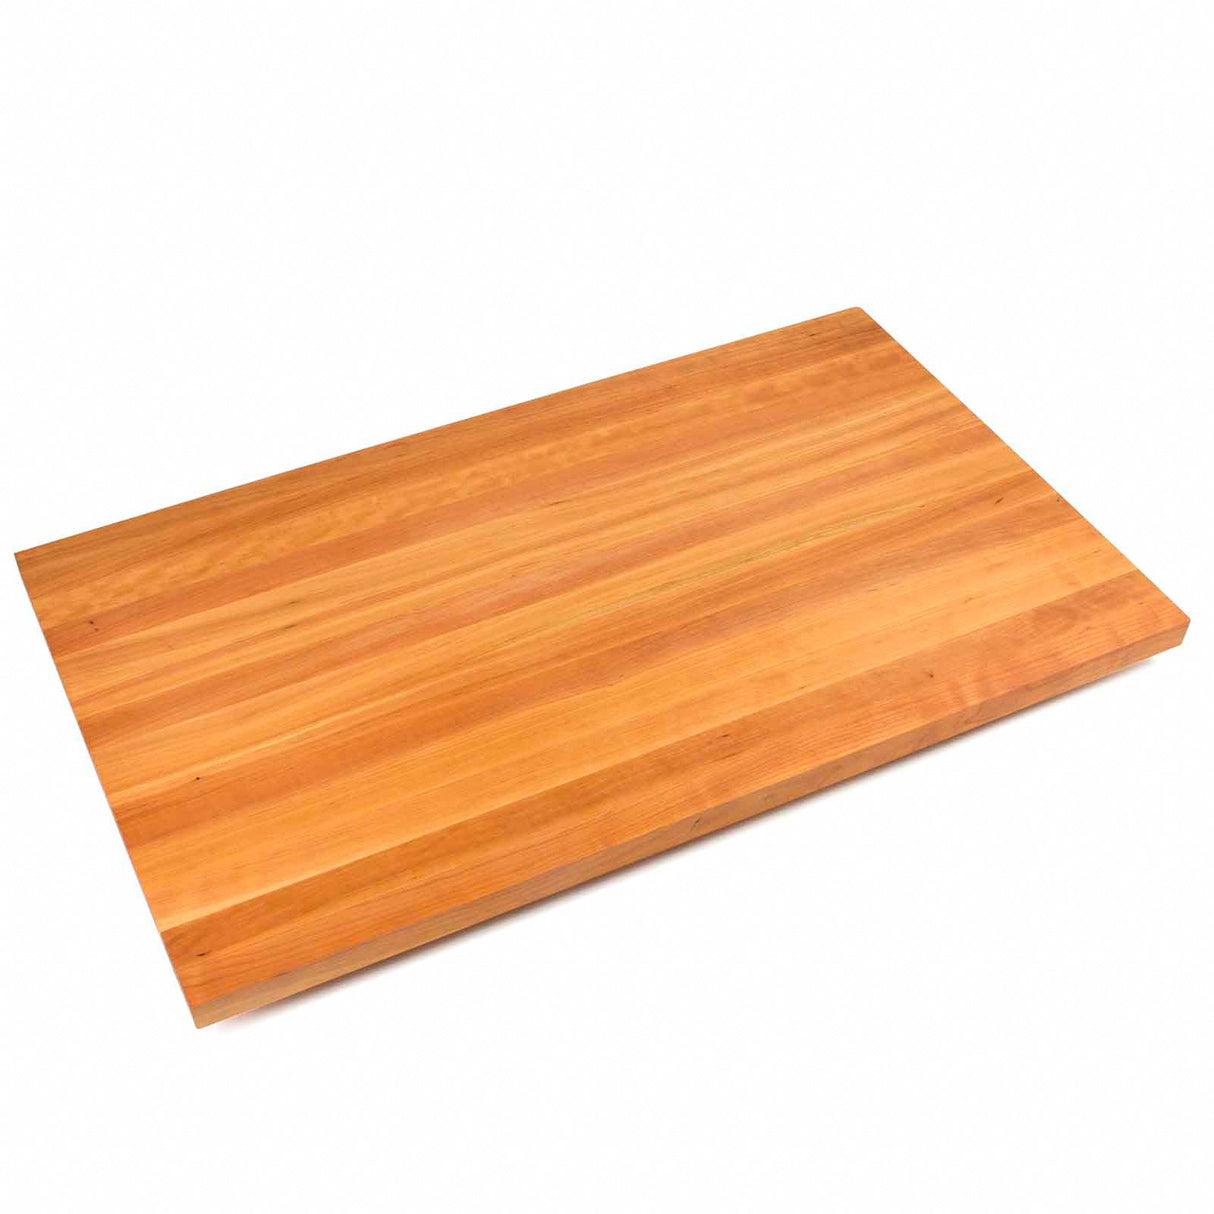 John Boos CHYKCT4842-O Cherry Kitchen Counter Top with Oil Finish, 1.5" Thickness, 48" x 42"